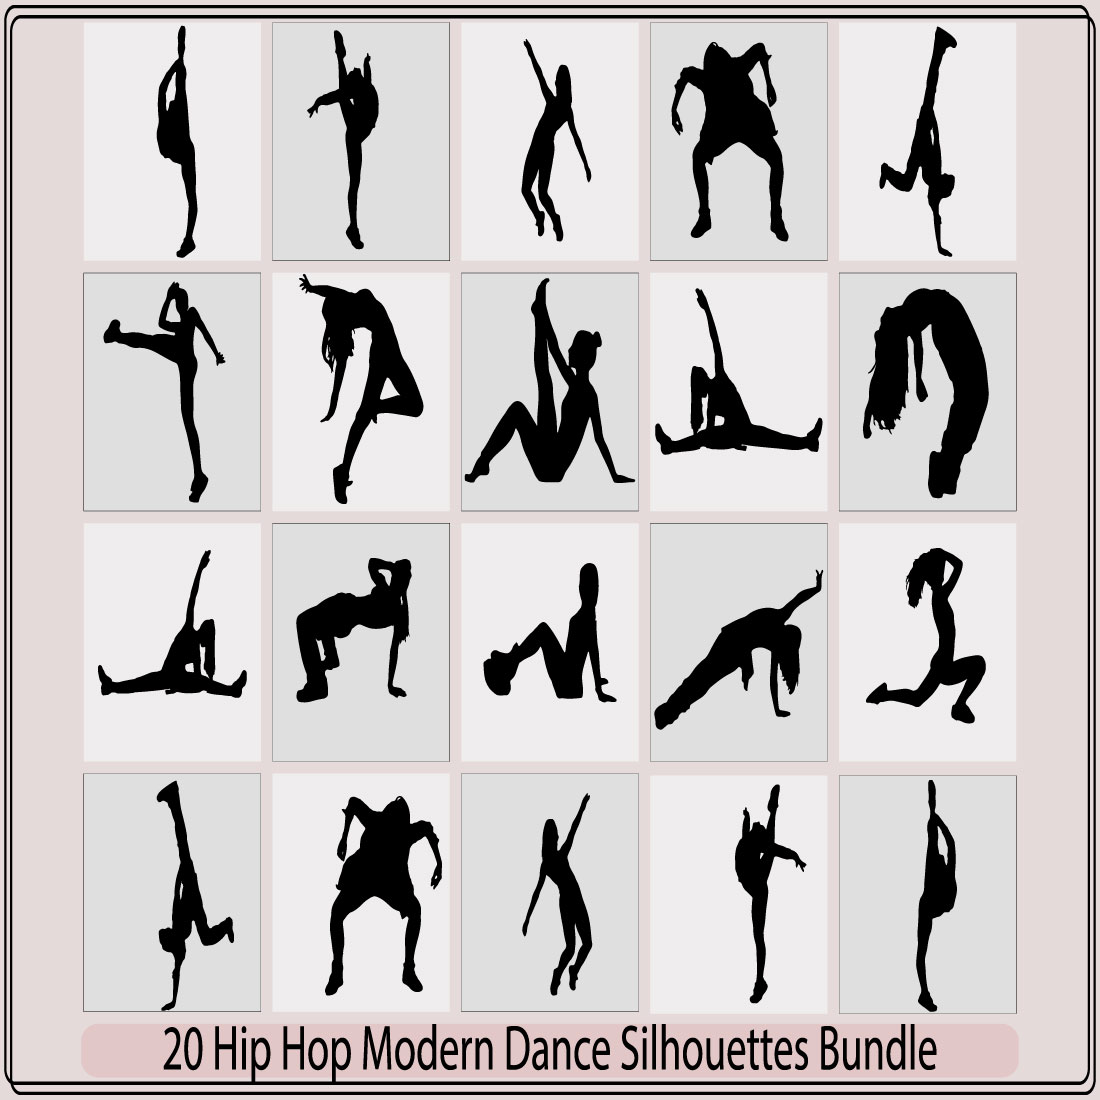 Dancing street dance silhouettes,dancing street dance silhouette ,women street dance hip hop dancers in silhouette cover image.